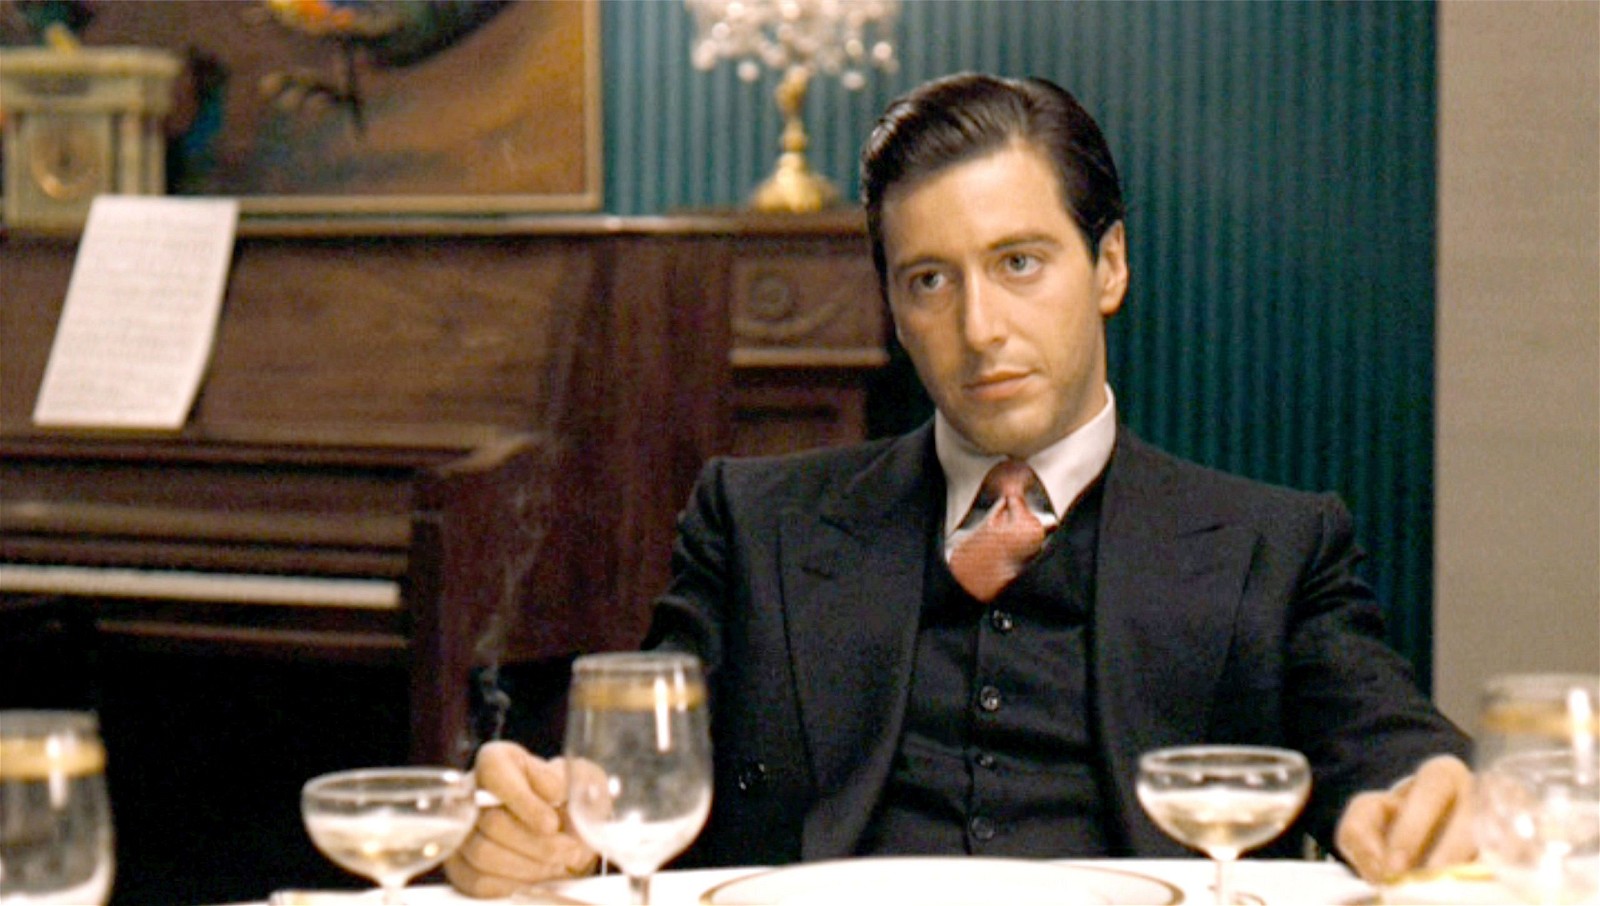 Al Pacino as Michael Corleone in The Godfather (1972)